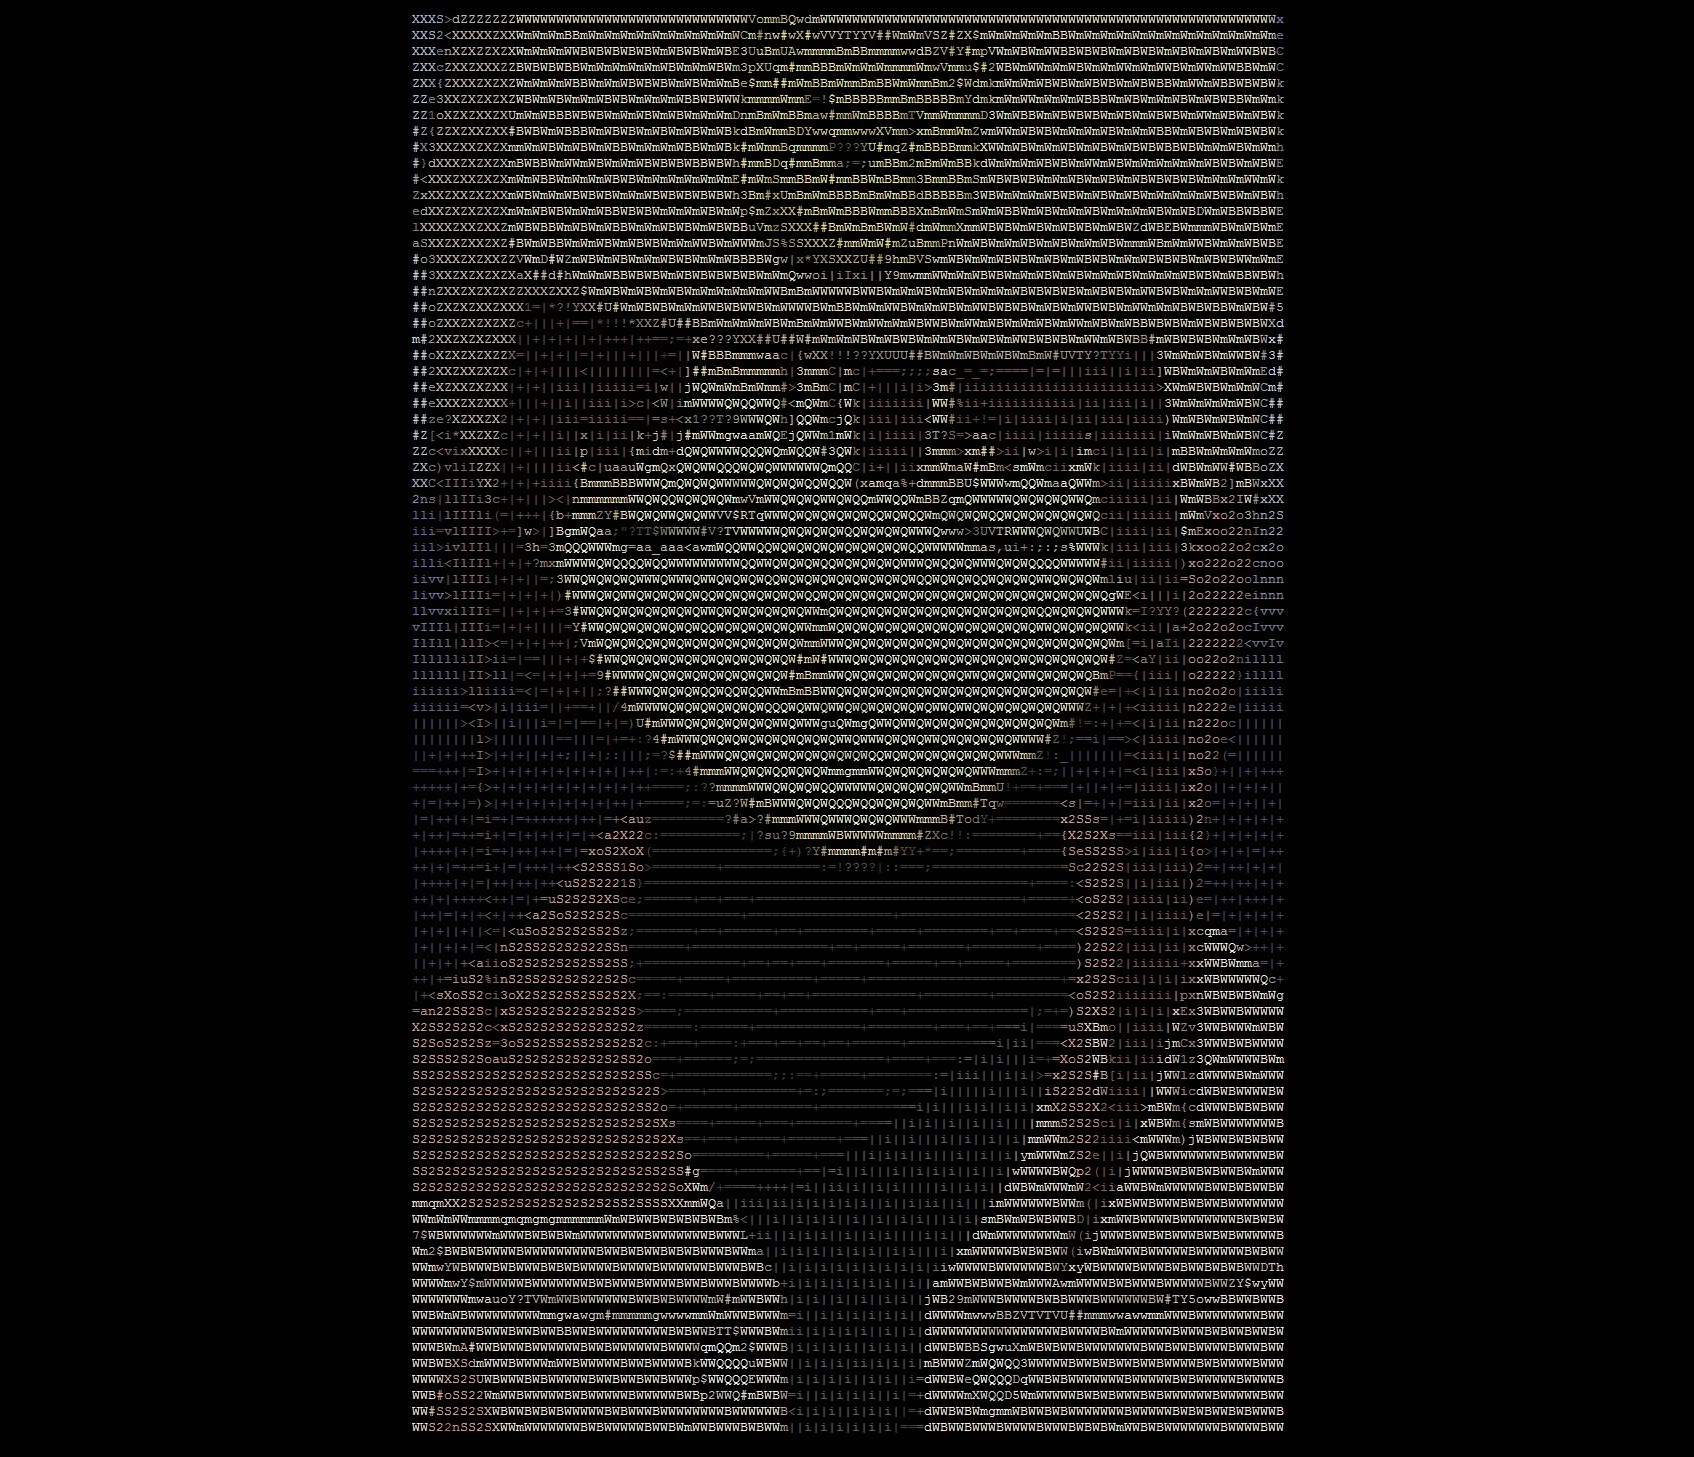 New Serial Experiments Lain Illustration